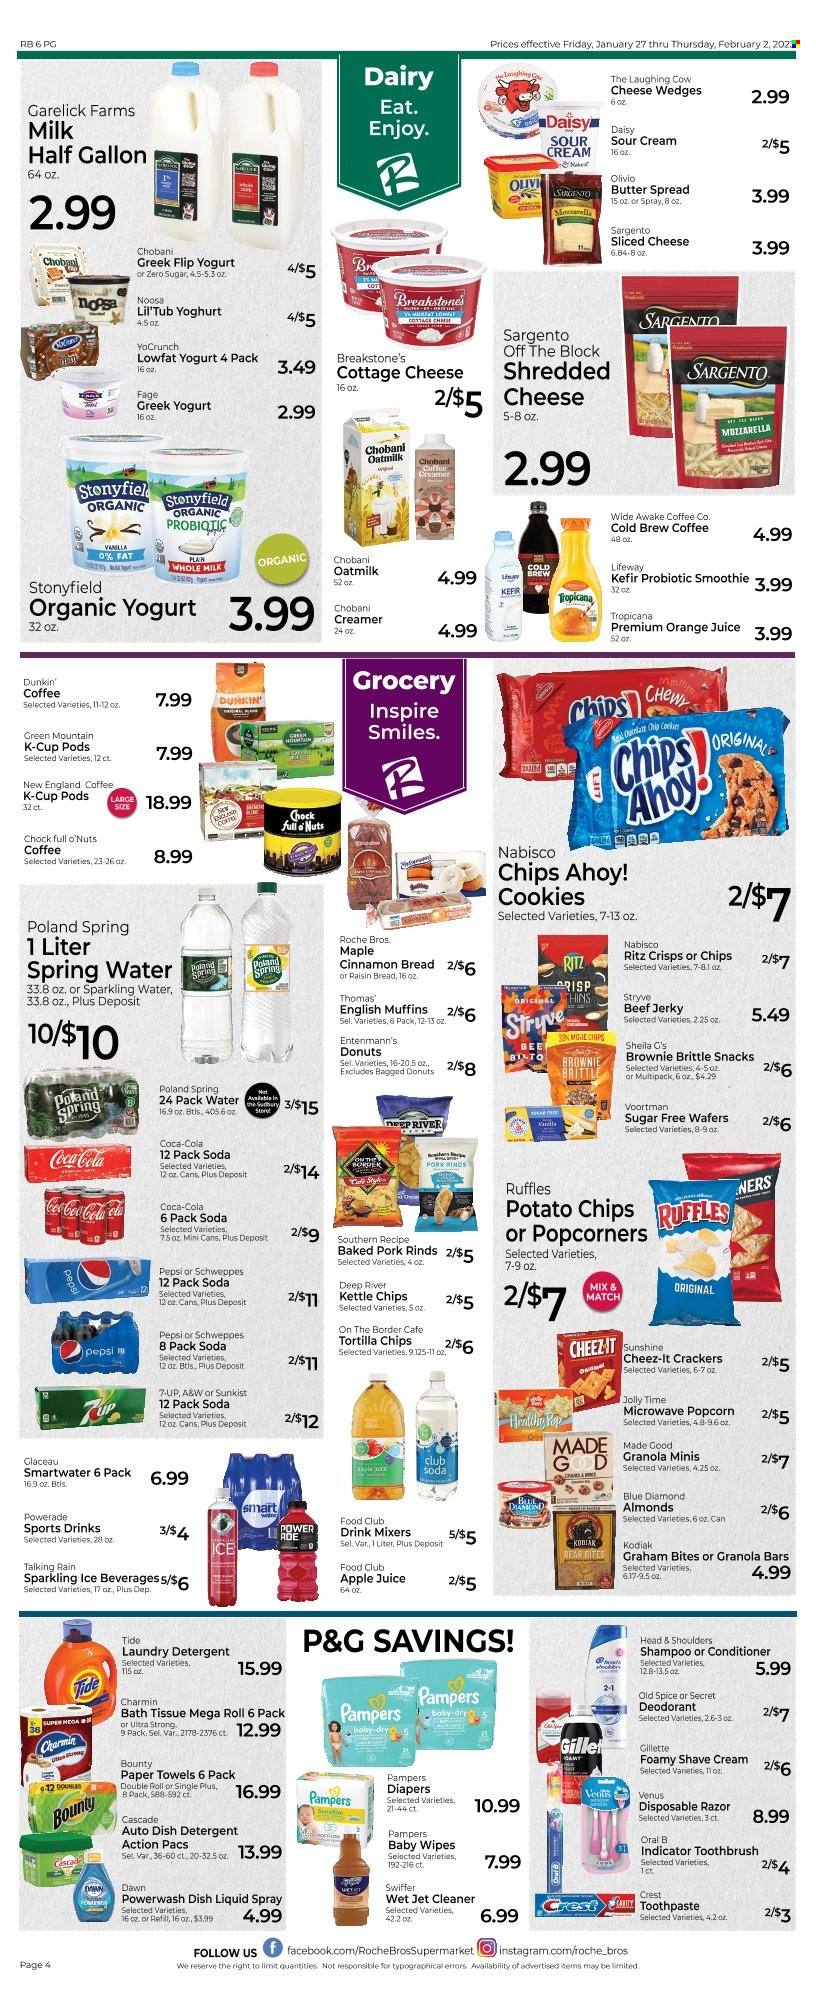 thumbnail - Roche Bros. Flyer - 01/27/2023 - 02/02/2023 - Sales products - english muffins, brownies, donut, Entenmann's, beef jerky, jerky, cottage cheese, mozzarella, sliced cheese, cheese, The Laughing Cow, Sargento, greek yoghurt, yoghurt, organic yoghurt, Chobani, milk, kefir, oat milk, Sunshine, creamer, Ola, cookies, wafers, snack, Bounty, crackers, Chips Ahoy!, RITZ, tortilla chips, potato chips, chips, popcorn, Cheez-It, Ruffles, granola bar, spice, cinnamon, almonds, Blue Diamond, apple juice, Coca-Cola, Schweppes, Powerade, Pepsi, orange juice, juice, 7UP, A&W, smoothie, Club Soda, spring water, sparkling water, Smartwater, coffee, coffee capsules, K-Cups, Green Mountain, wipes, Pampers, baby wipes, nappies, bath tissue, kitchen towels, paper towels, Charmin, detergent, cleaner, Swiffer, Cascade, Tide, laundry detergent, dishwashing liquid, dishwasher cleaner, Jet, shampoo, Old Spice, toothbrush, Oral-B, toothpaste, Crest, conditioner, Head & Shoulders, anti-perspirant, deodorant, Gillette, Venus, shave cream, disposable razor. Page 3.